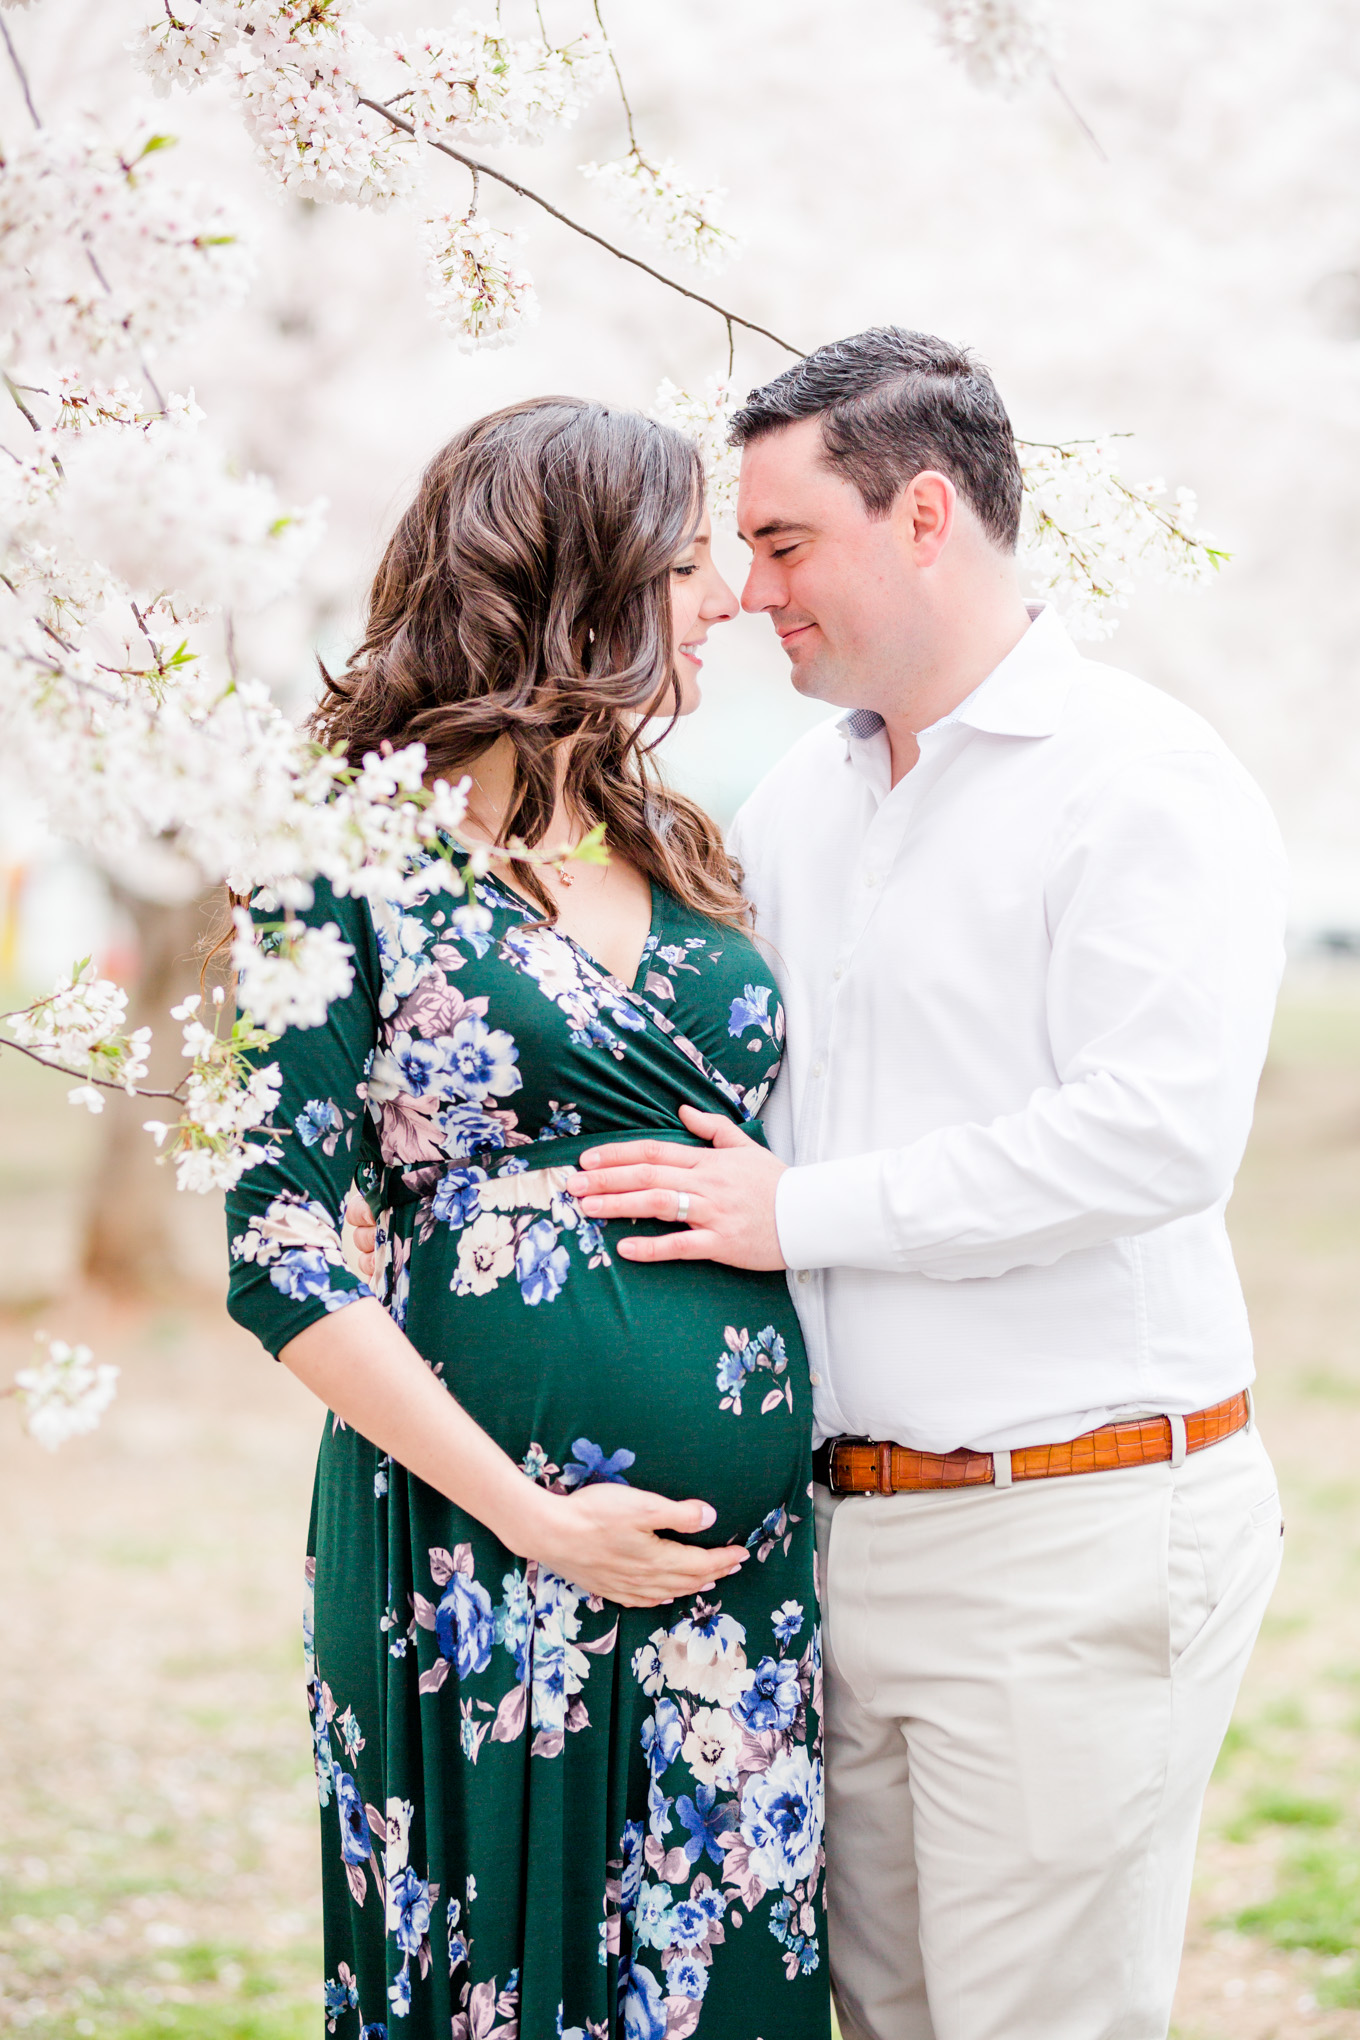 D.C. cherry blossoms maternity session, maternity portraits, maternity photos, D.C. cherry blossoms, cherry blossoms maternity photo, floral print dress, brunette expectant mom, expecting mother, brunette woman, pregnant woman, third trimester, baby bump, couple snuggling, cute couple